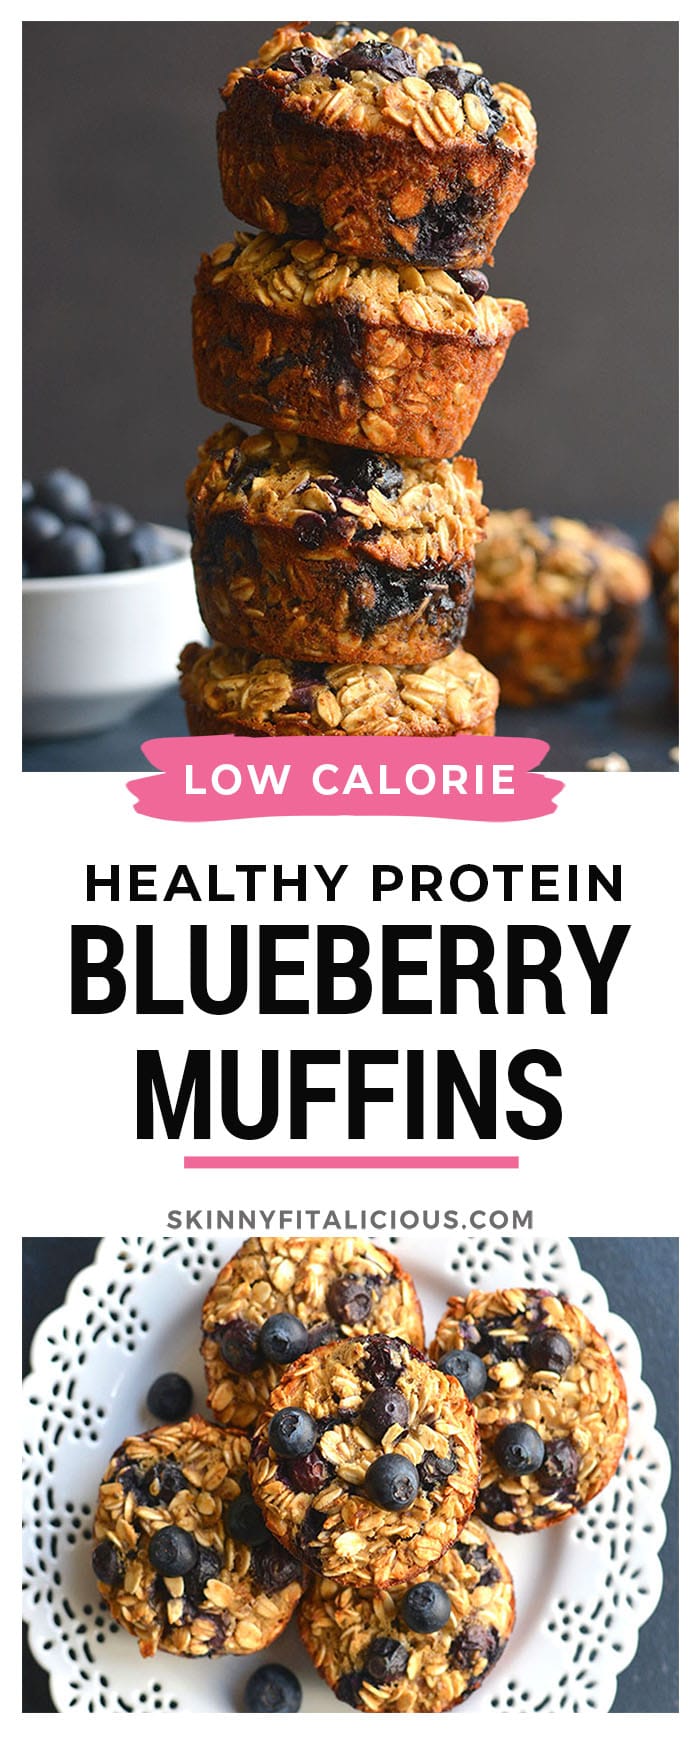 Blueberry Protein Oatmeal Muffins! These easy make ahead muffins are perfect for meal prepping a healthy breakfast or snack. Higher in protein to balance the carbs, these 97 calorie muffins are a better choice.